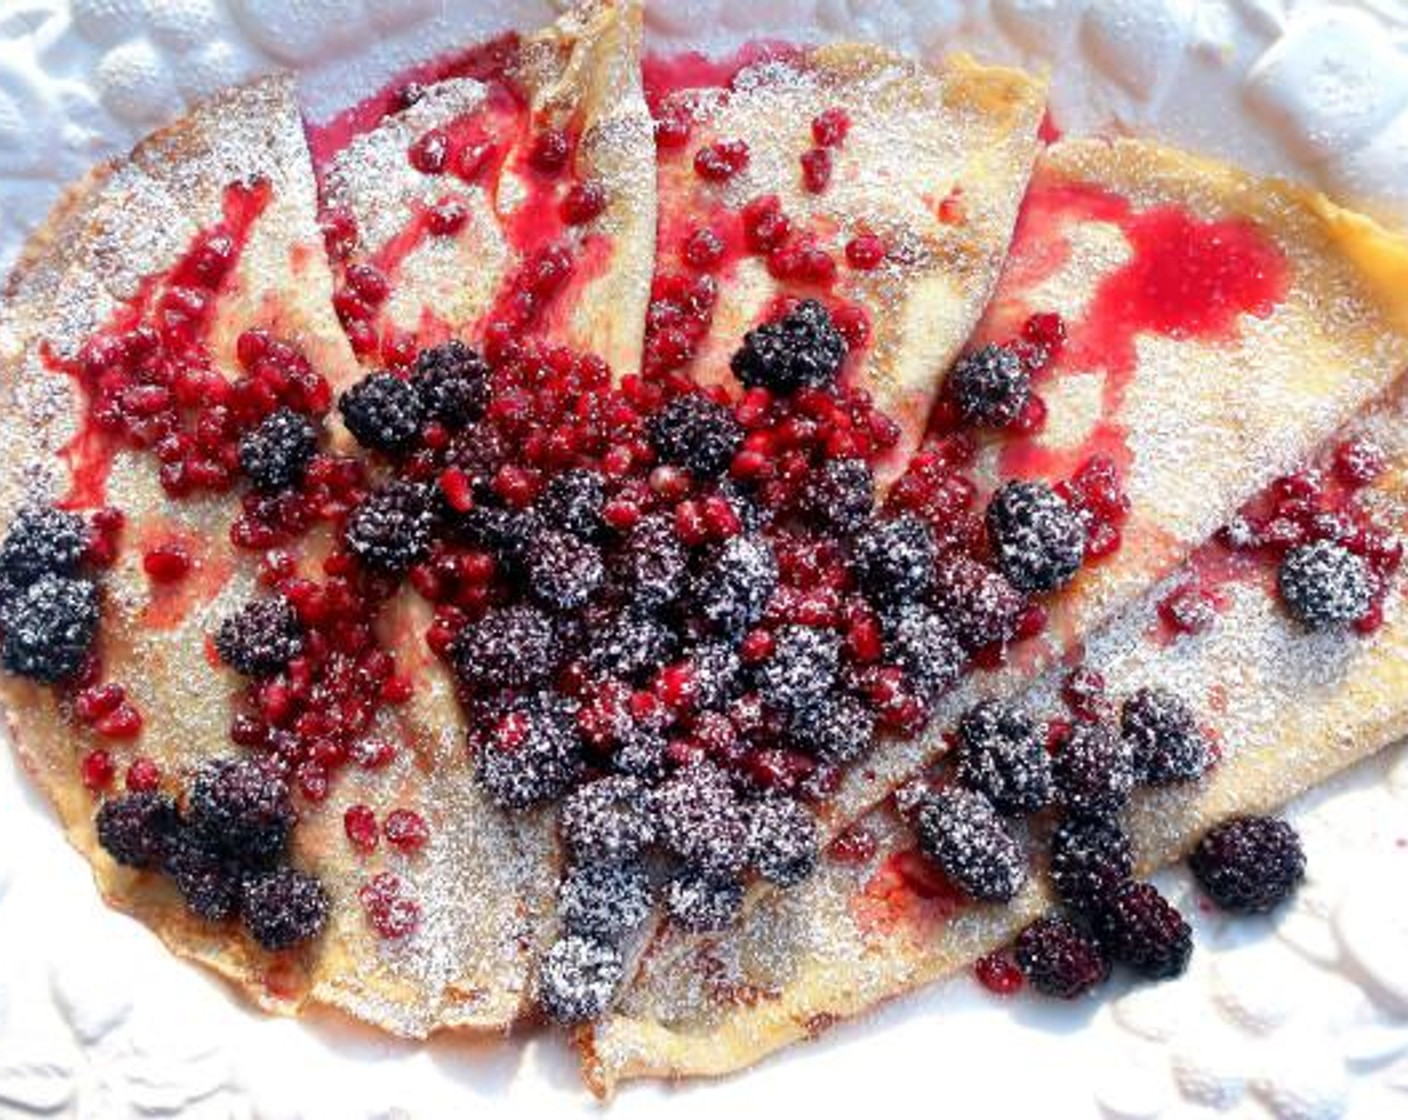 Vanilla Crepes with Caramelized Blackberries and Pomegranate Seeds